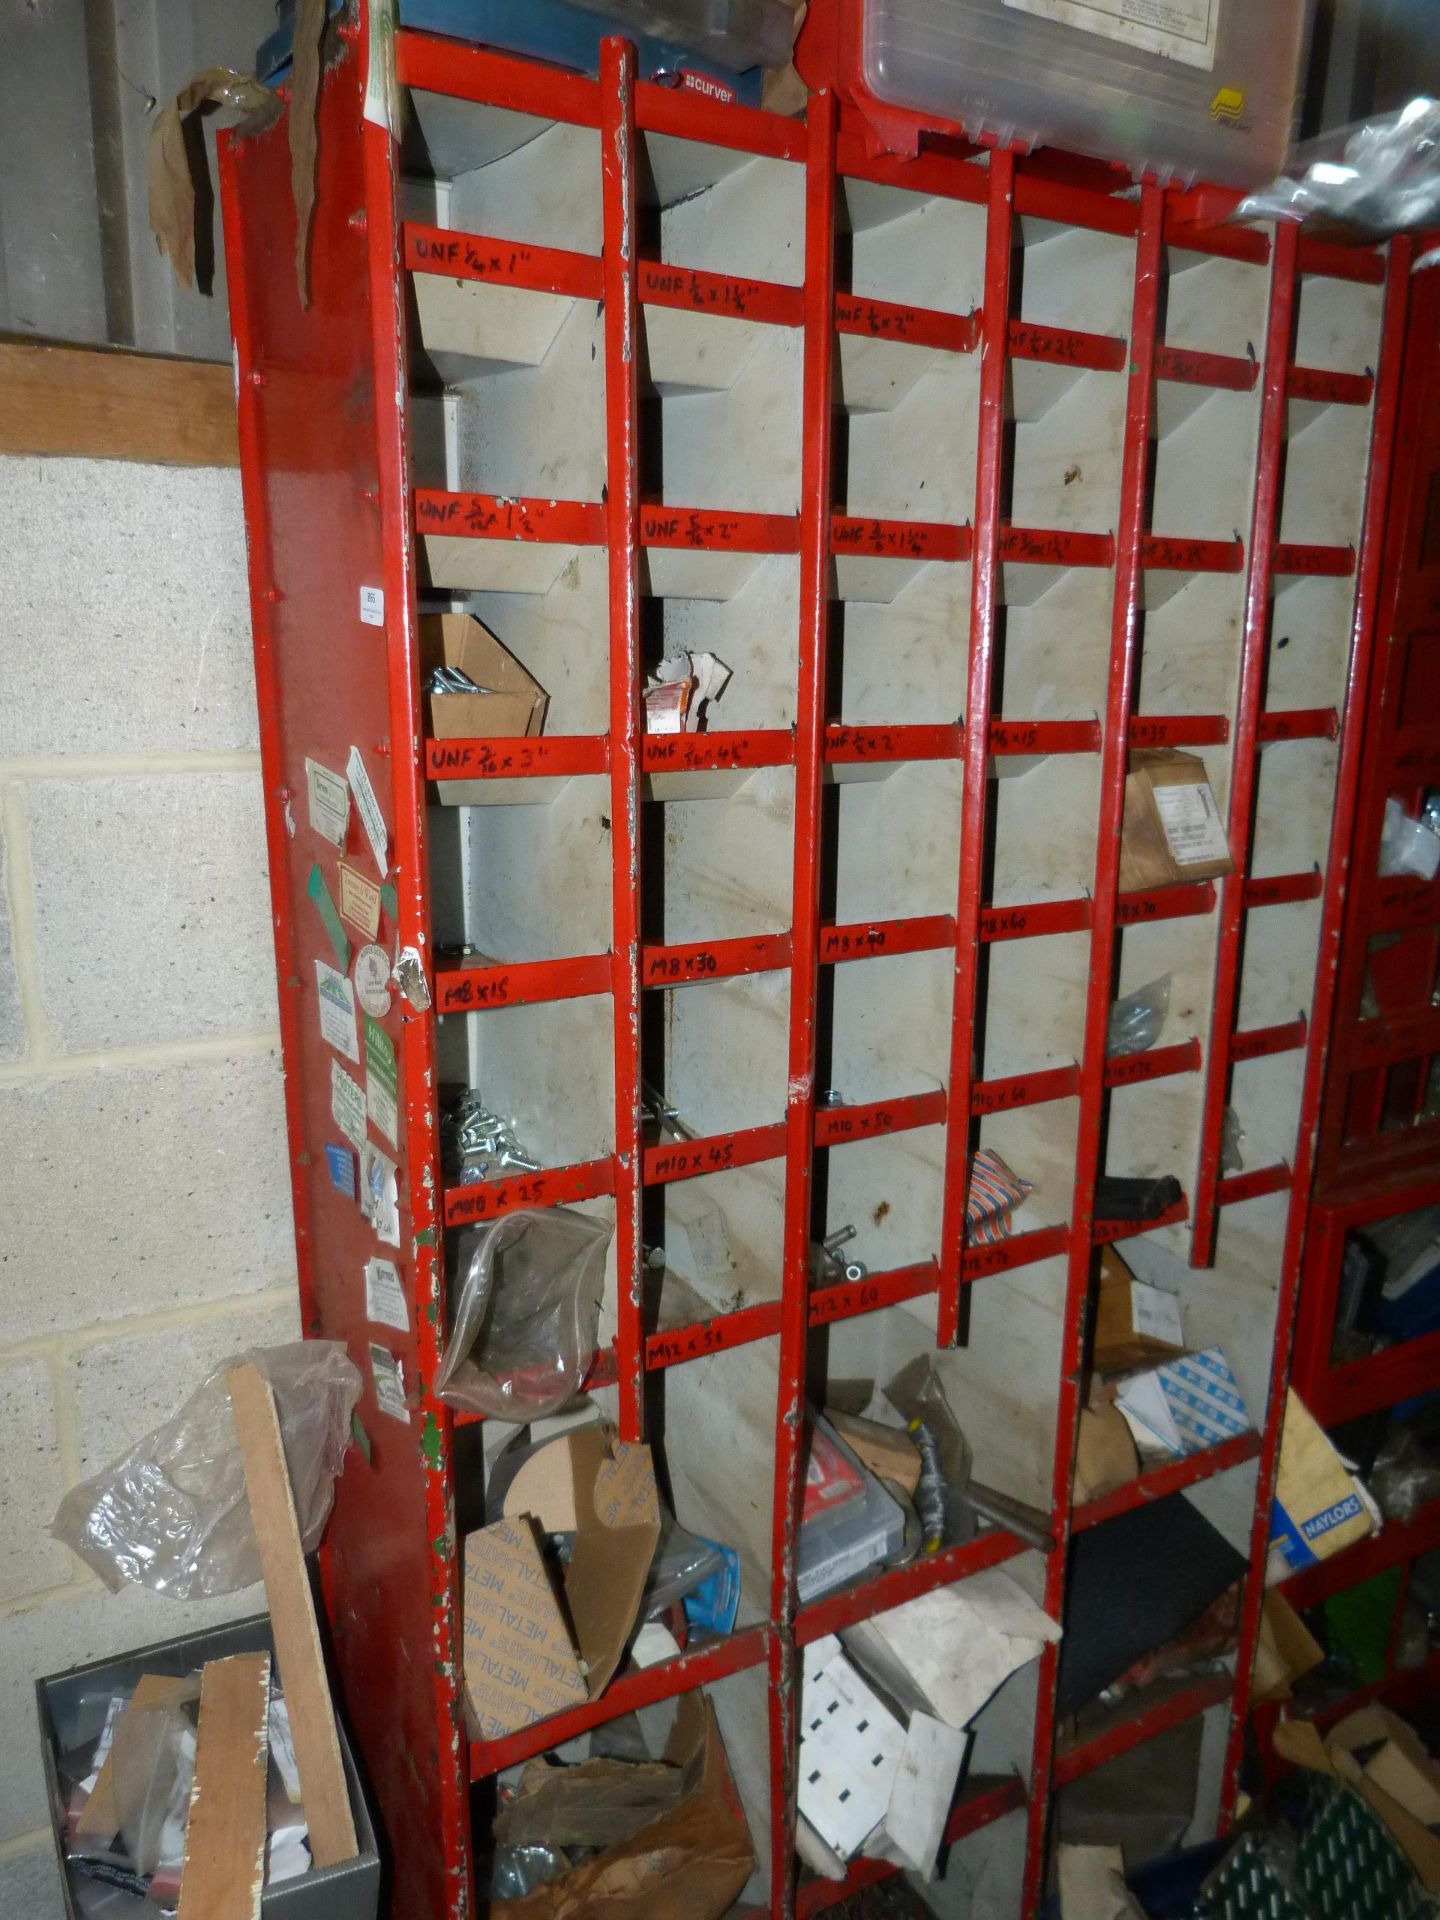 *Red Pigeon Hole Rack and Contents of Various Nuts